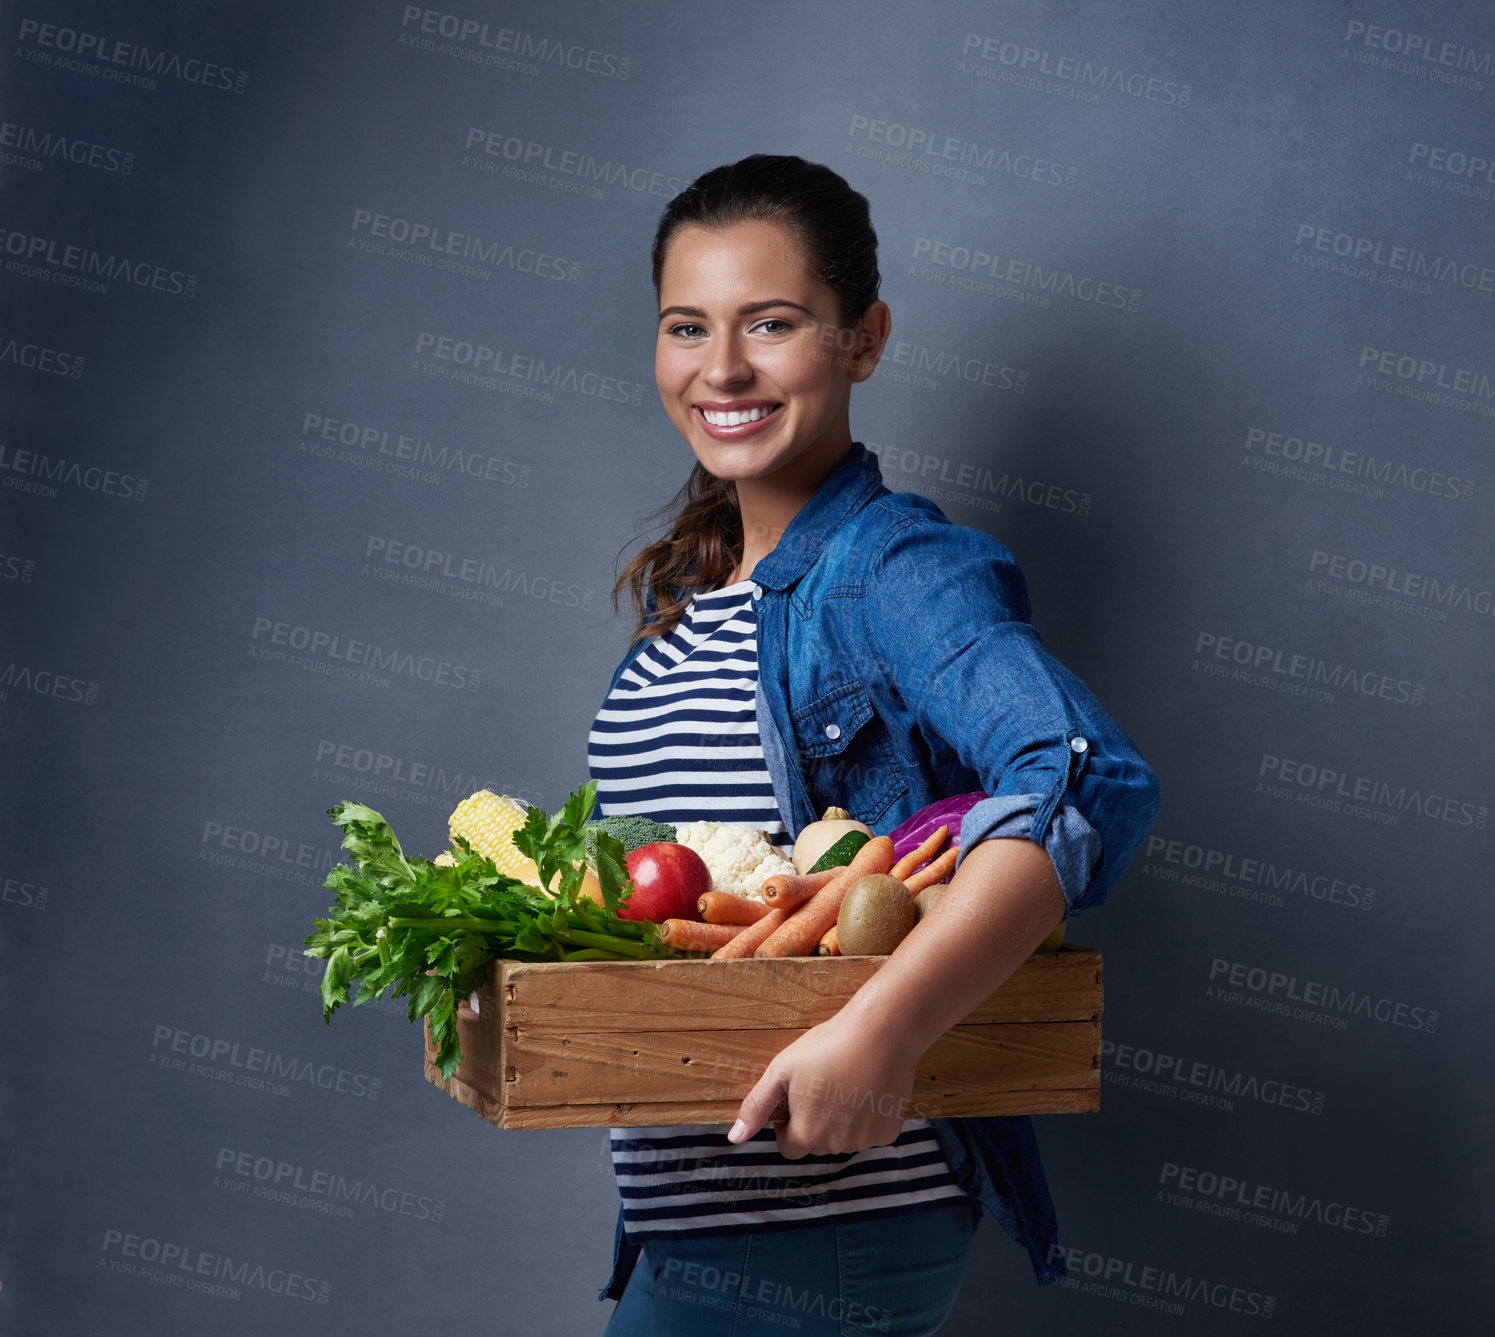 Buy stock photo Studio shot of a beautiful young woman holding a wooden crate full of vegetables and fruit against a blue background